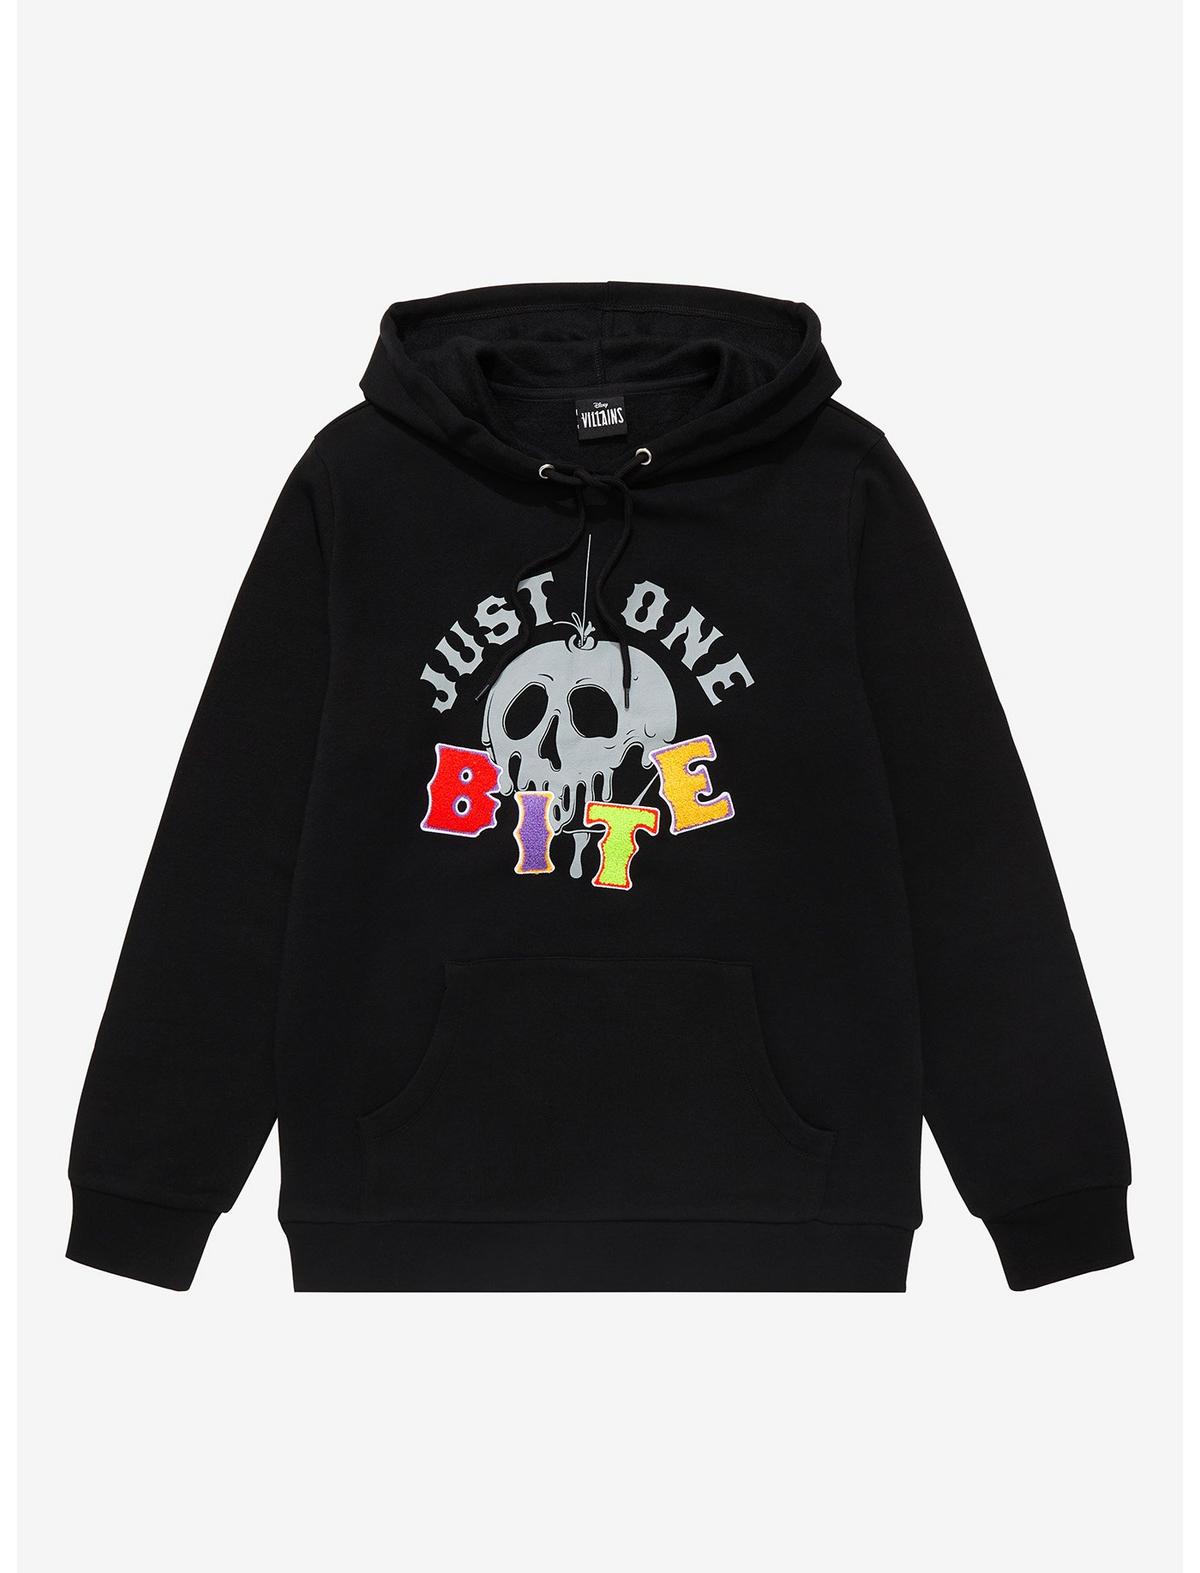 Stay Warm All Winter with Disney Sweatshirts from BoxLunch - Fashion